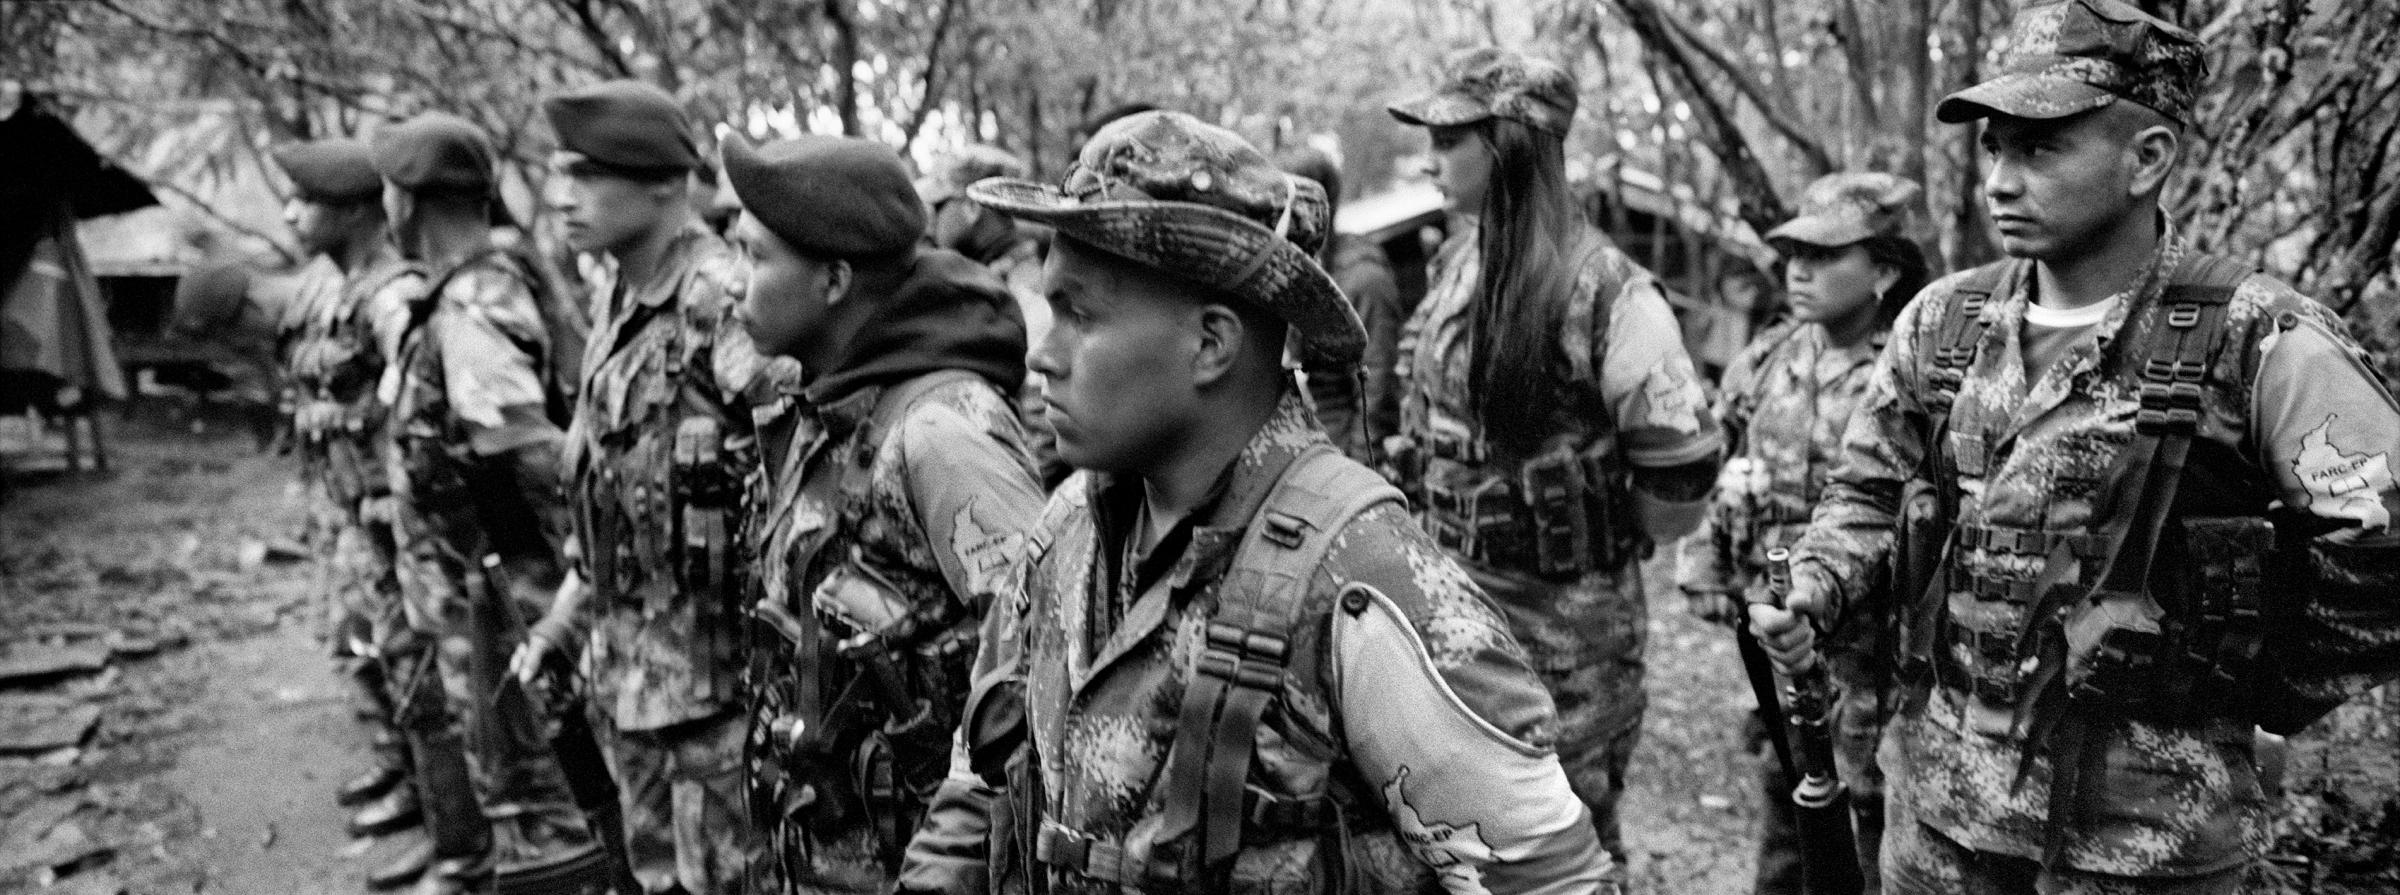 FARC guerrilla members in training, July 2016.. A peace agreement was reached in Havana, Aug. 24, 2016, ending Colombia's 52-year old conflict that claimed more than 200,000 lives, Cauca, Colombia.